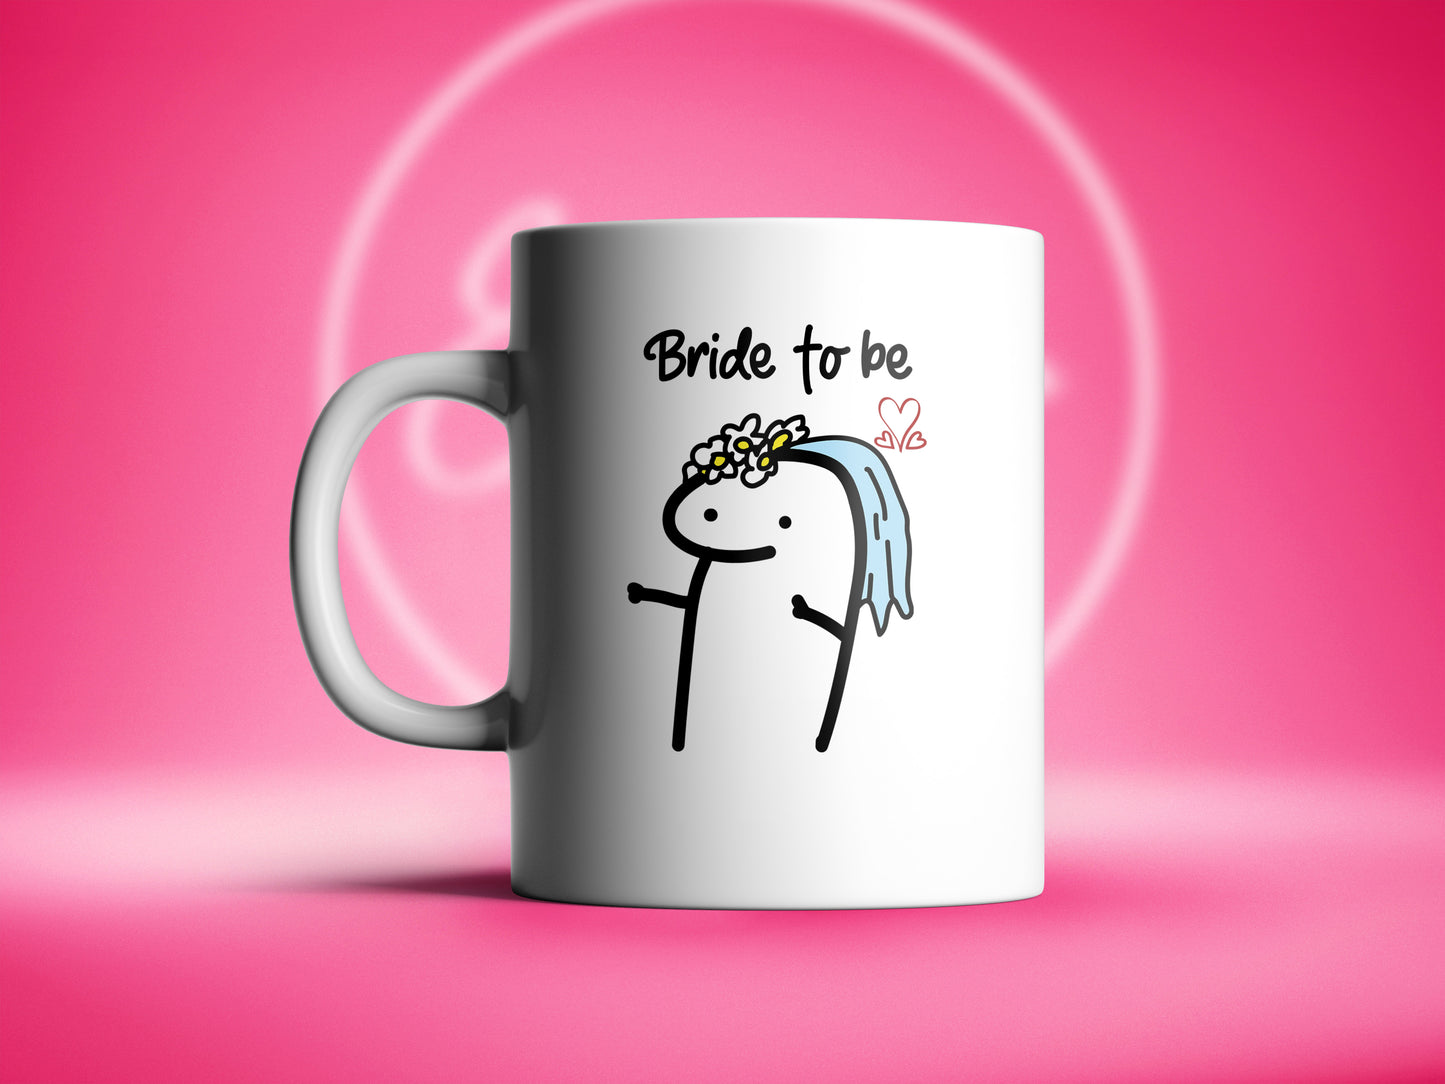 Bride to be...